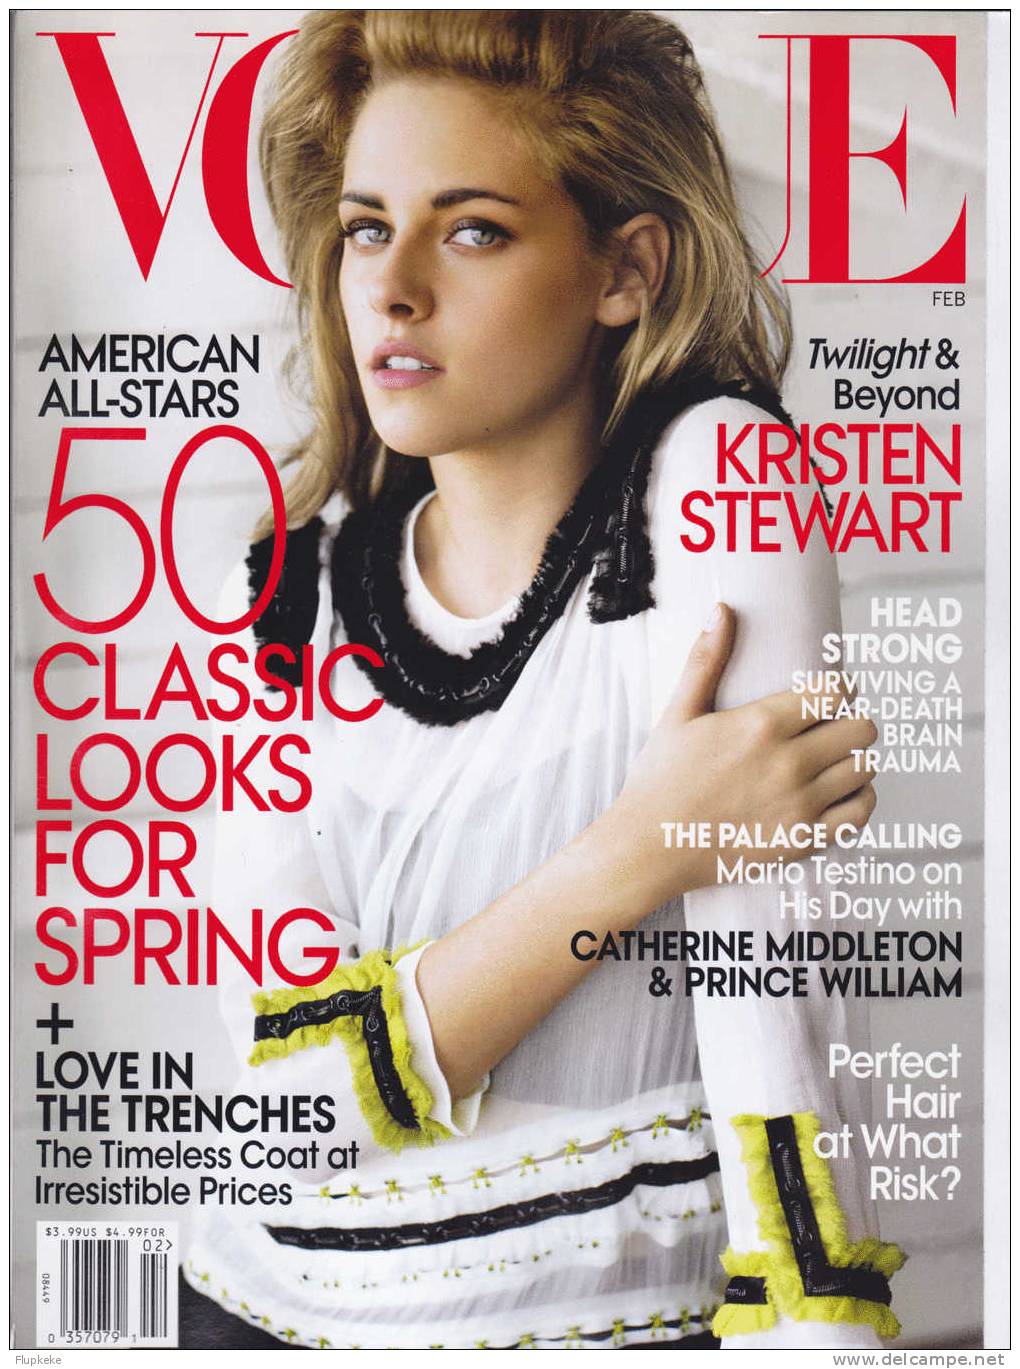 Vogue February 2011 American All-Star 50 Classic Looks For Spring Cover Kristen Stewart - Entretenimiento